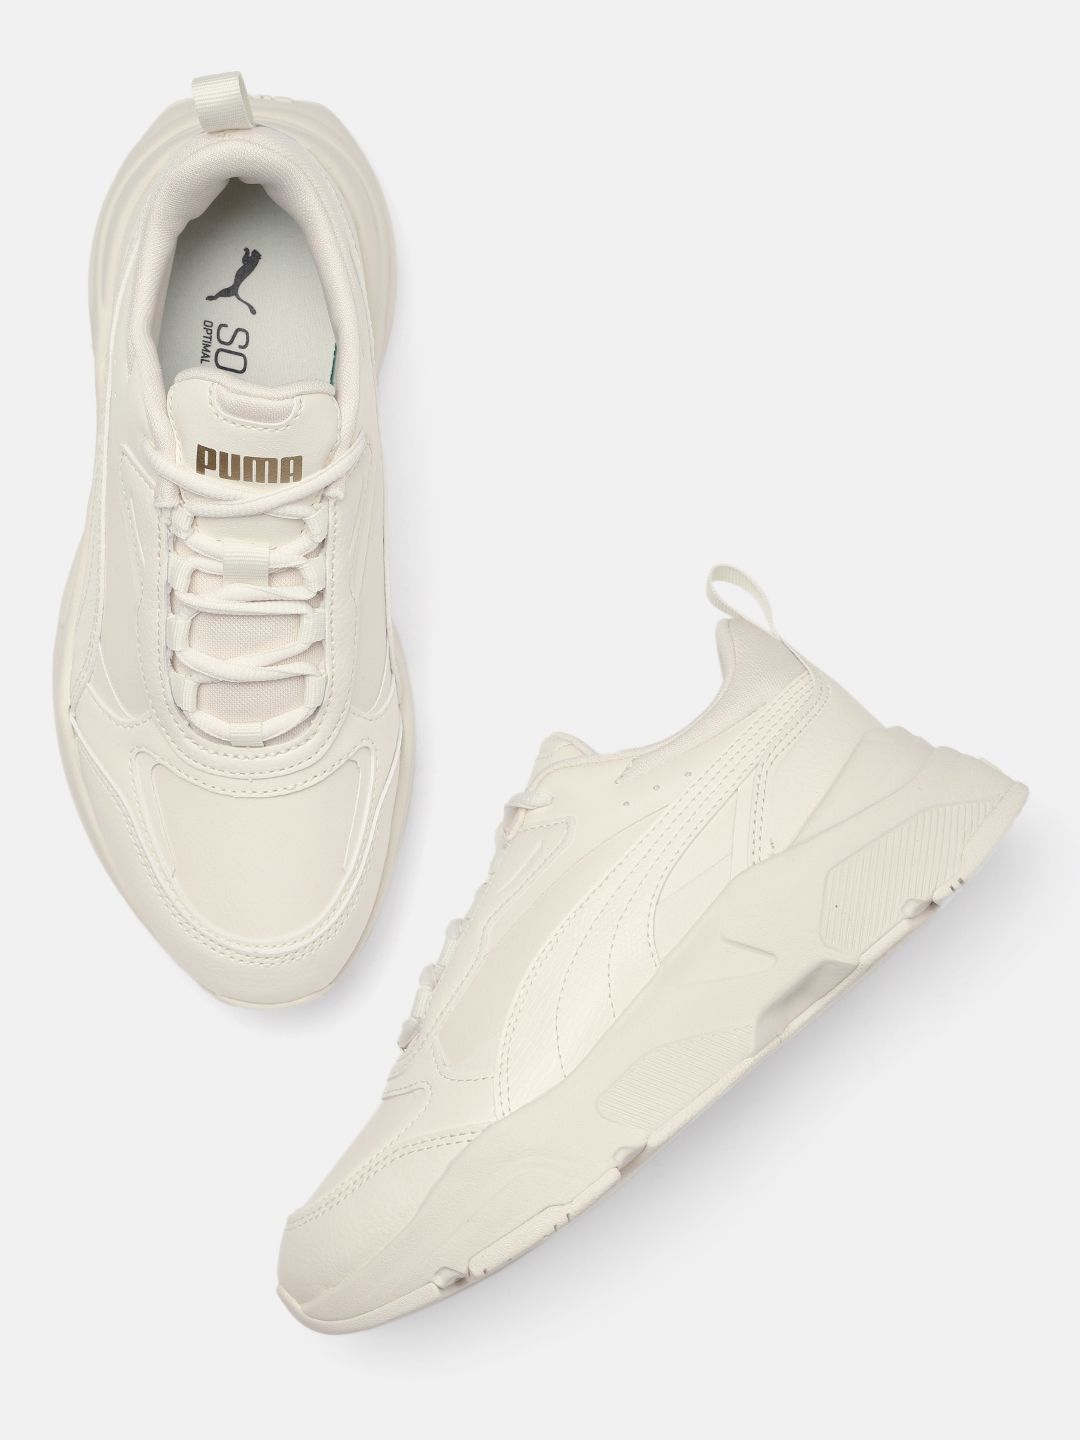 Puma Women Off White Textured Sneakers Price in India